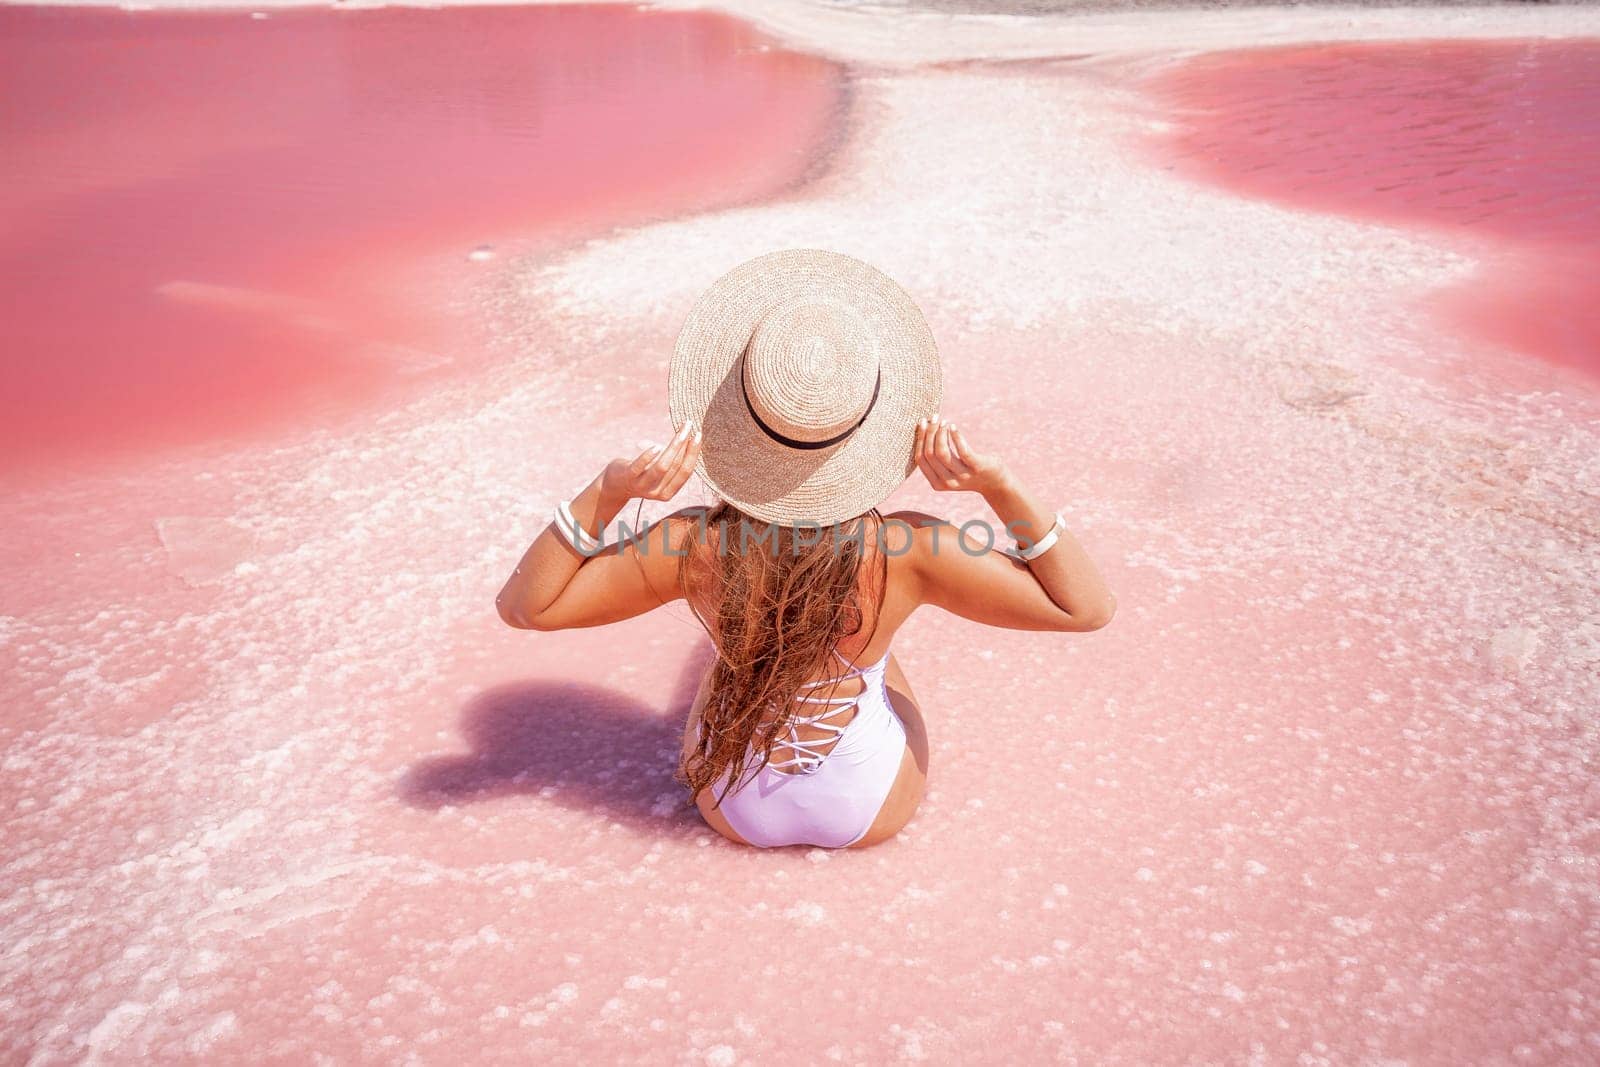 A woman traveler looks at an amazing pink salt lake. He sits with his back in a bathing suit and holds his hat in his hands. Wanderlust travel concept.